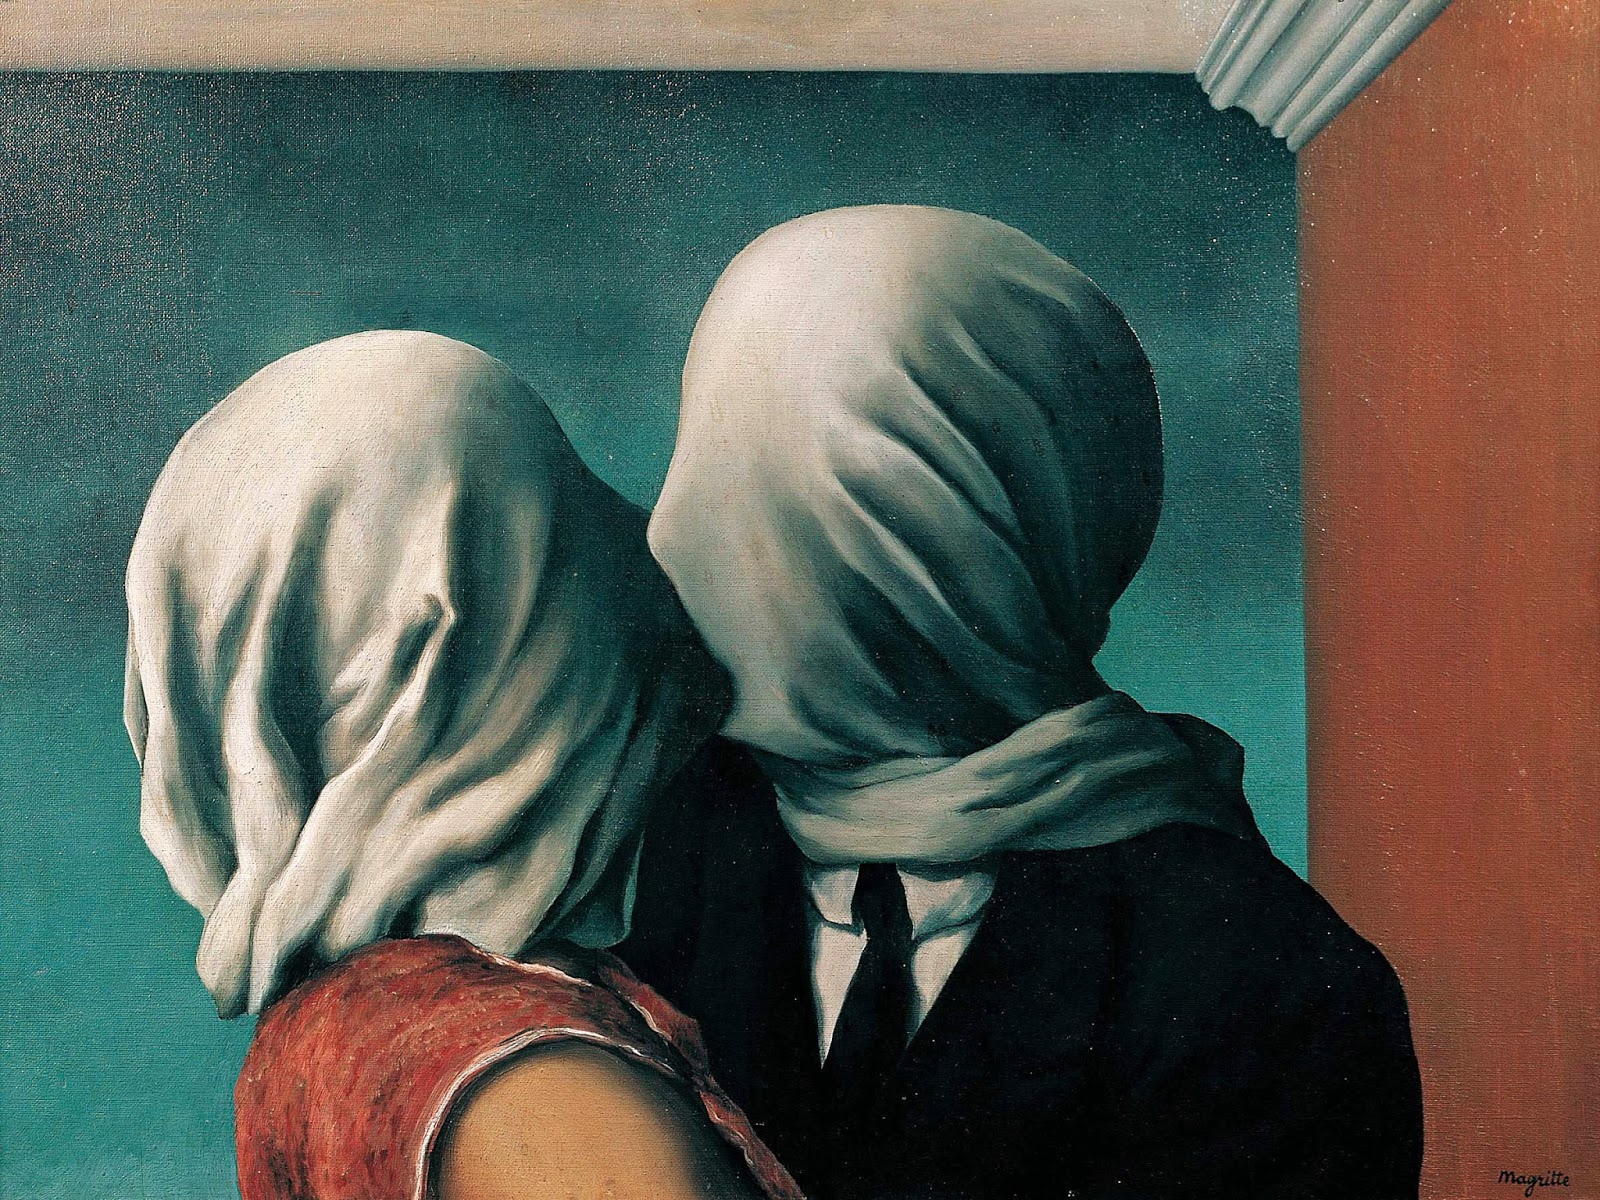 1928, "The lovers II" by ©Rene Magritte